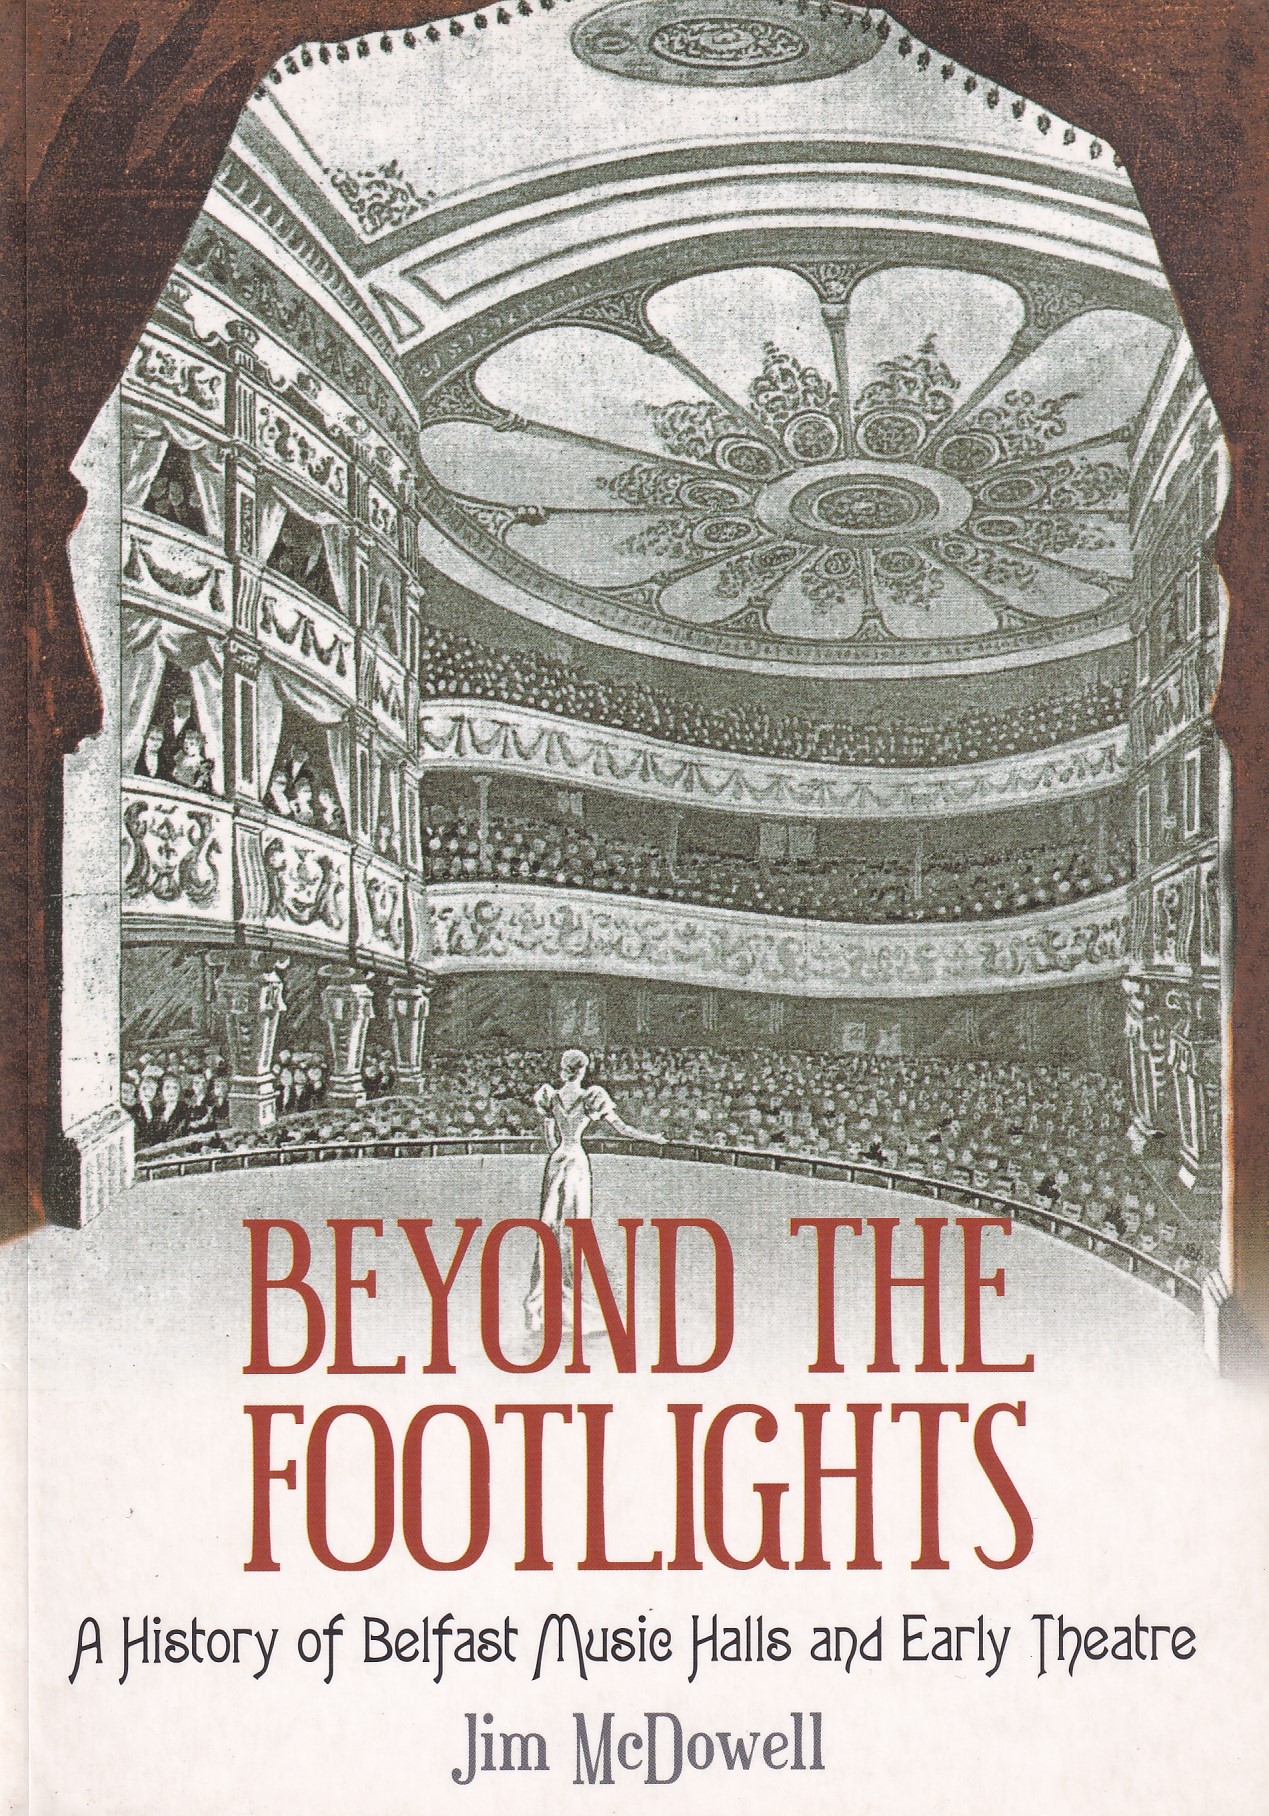 Beyond the Footlights: A History of Belfast Music Halls and Early Theatre | Jim McDowell | Charlie Byrne's